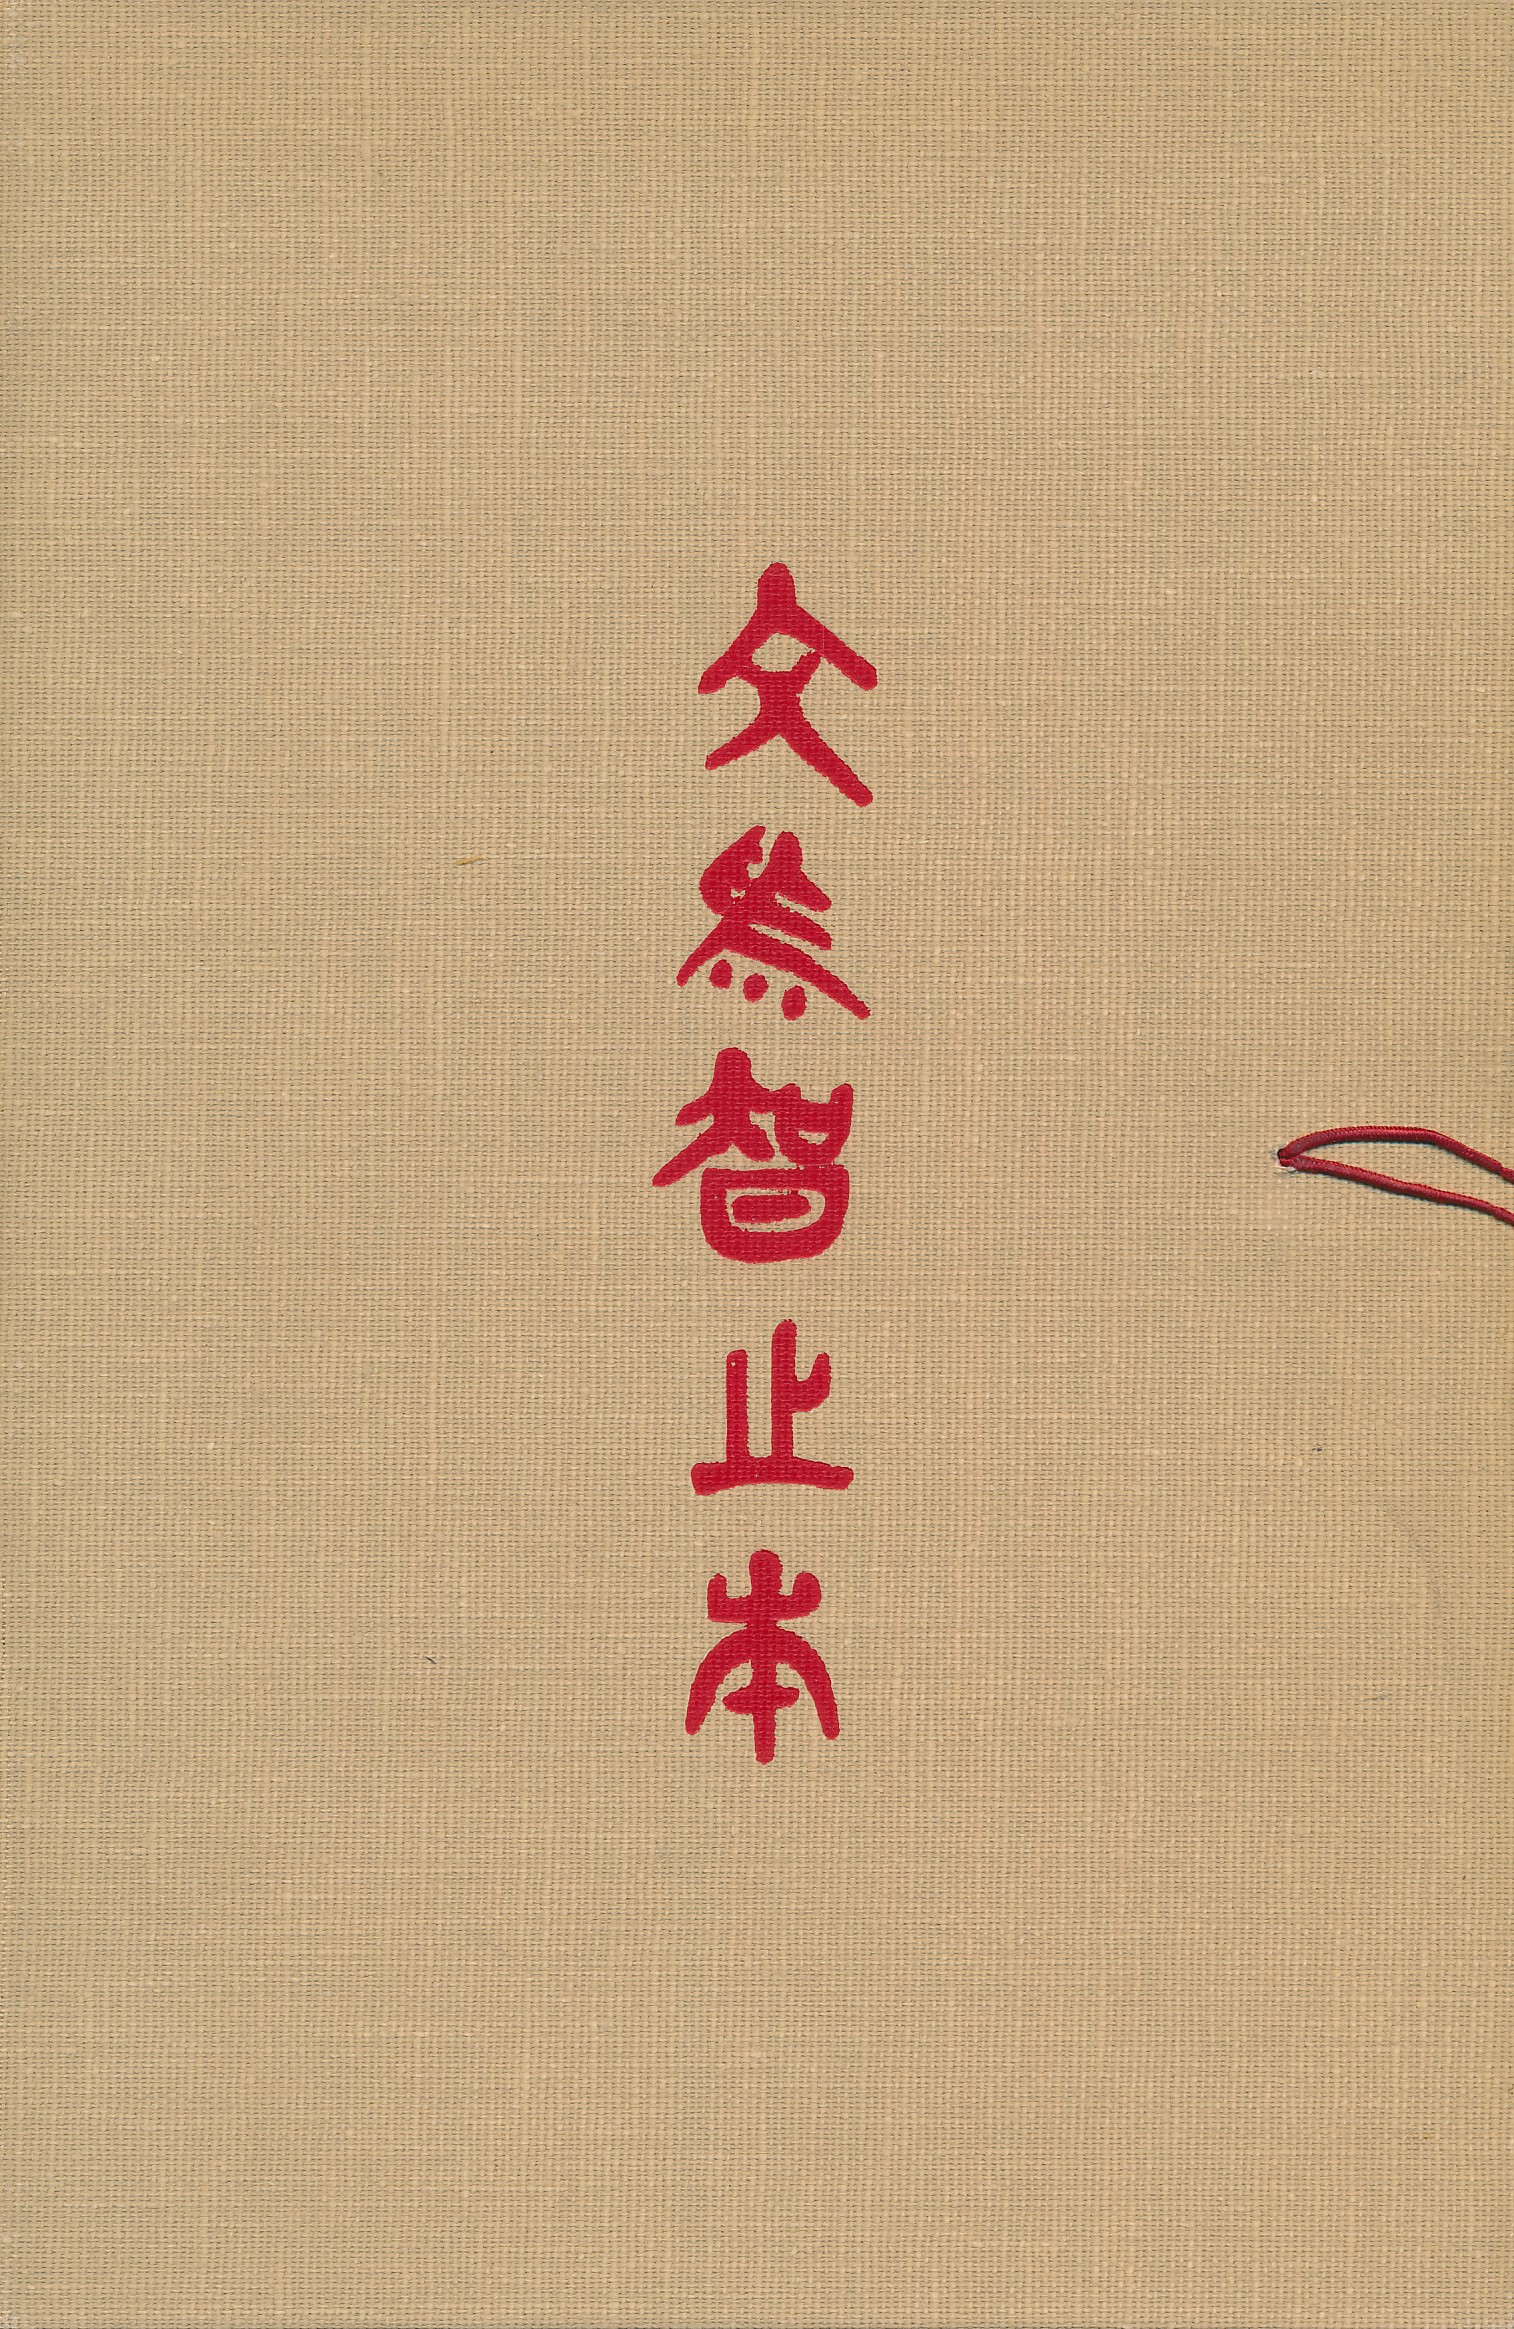 The Analects of Confucius. Signed Limited edition.